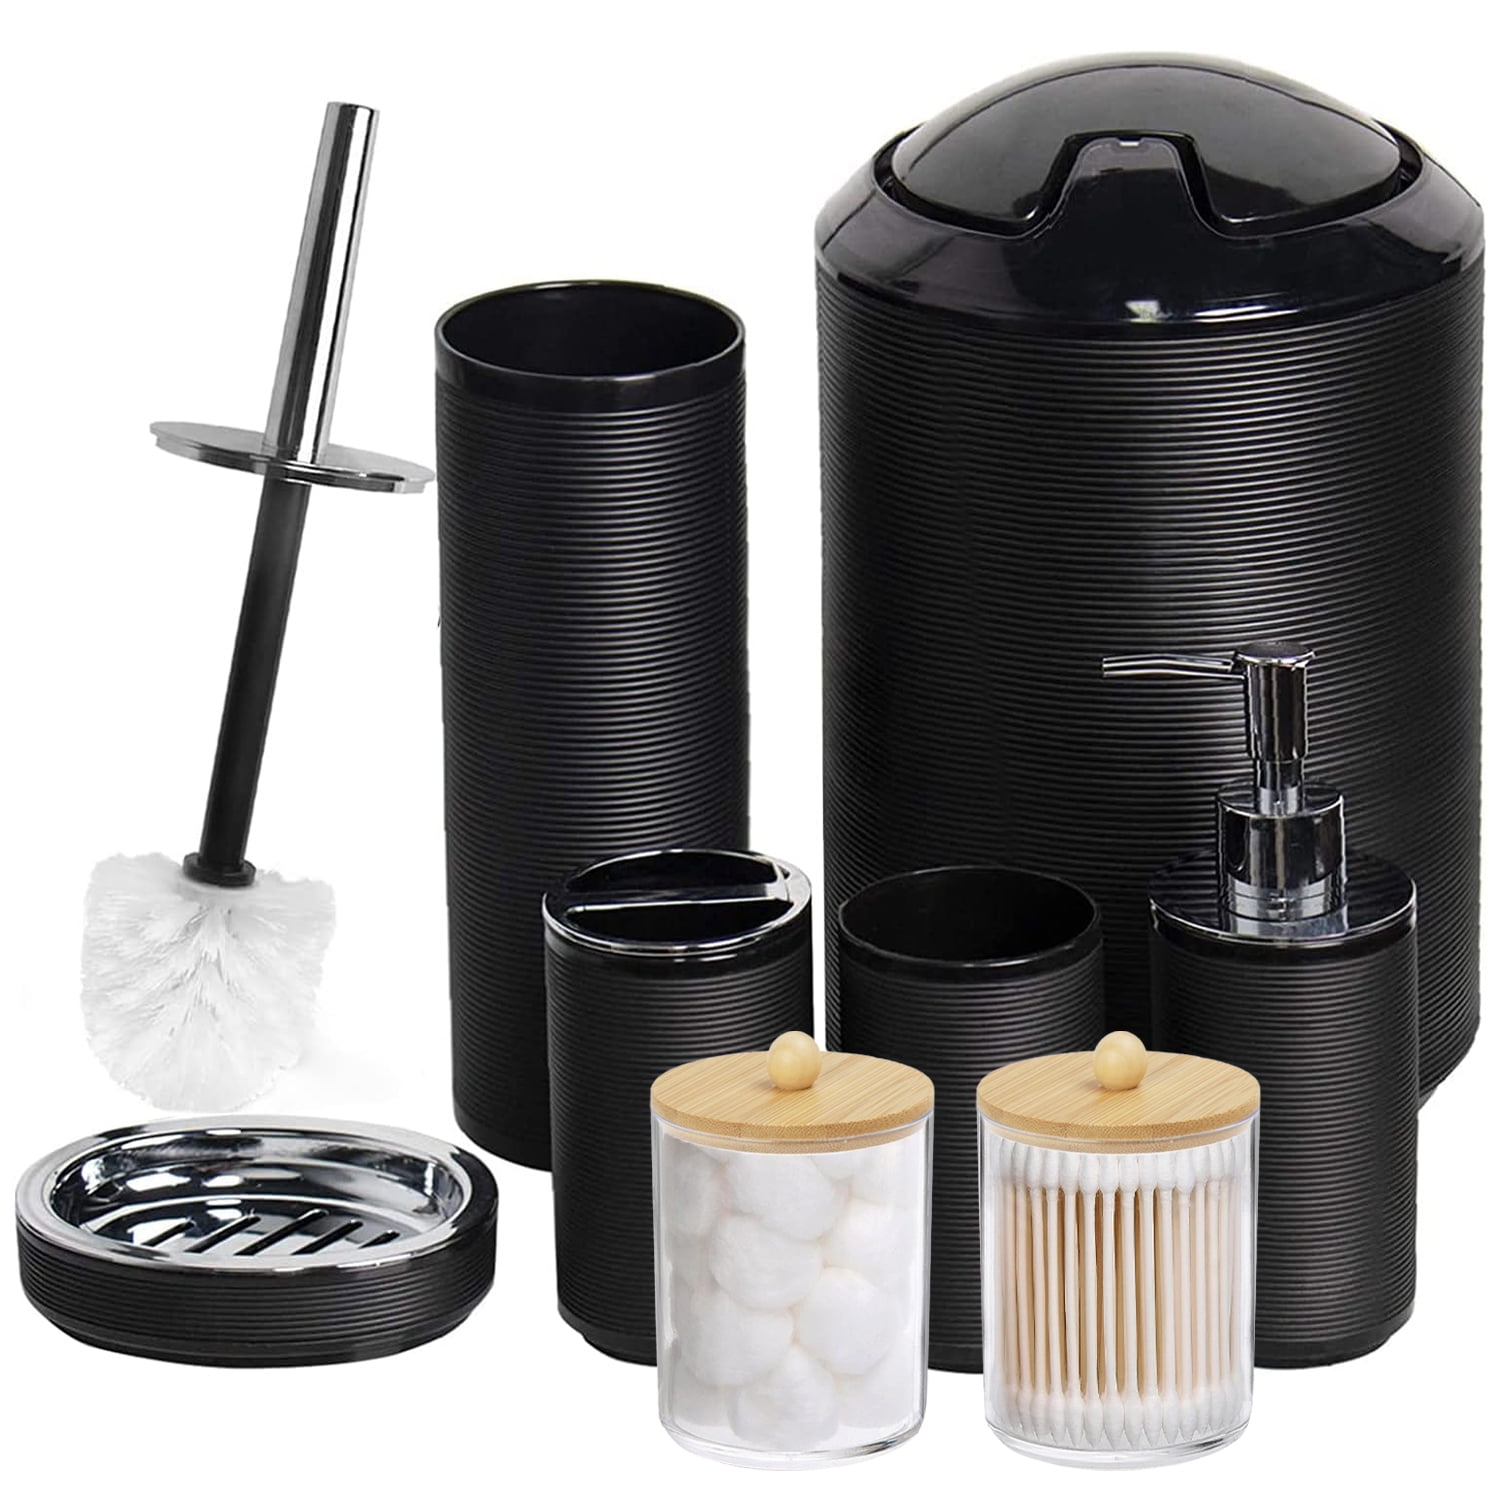 MIERTING Black Bathroom Accessories Set 5 Pcs, Matte Black Bathroom  Accessories, Plastic Soap Dispenser and Toothbrush Holder Set, Qtip &  Cotton Ball